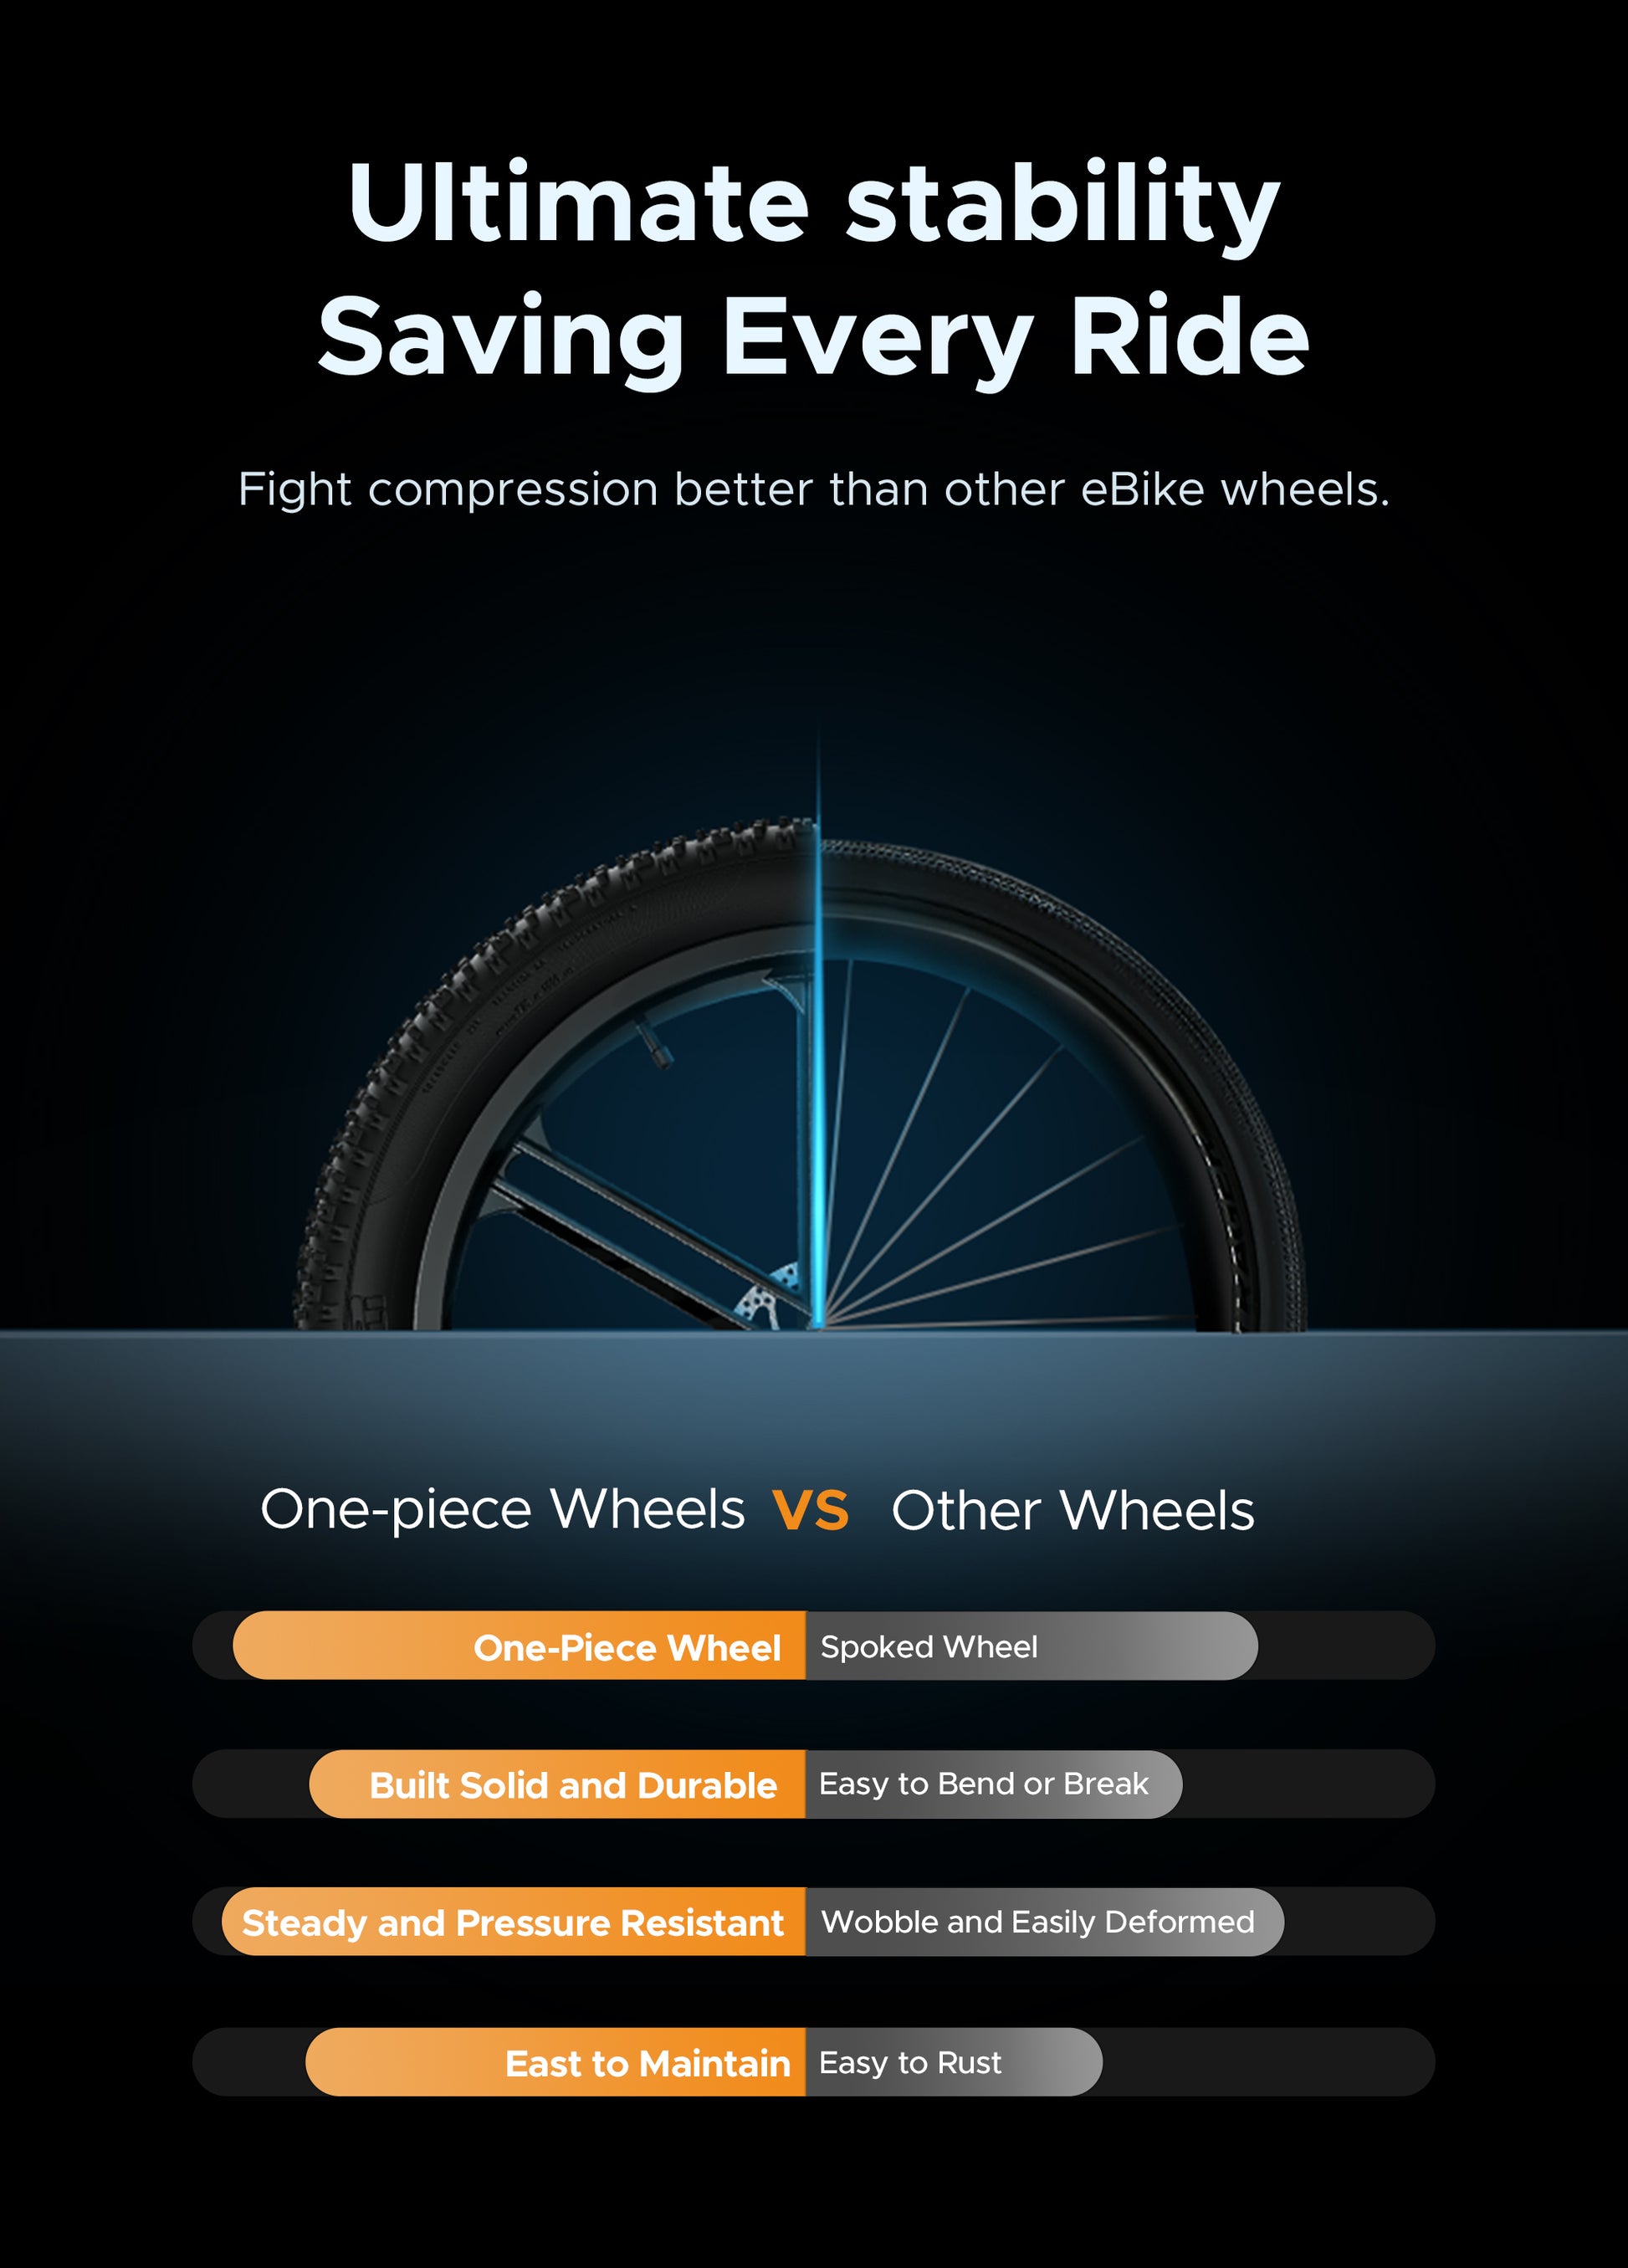 Comparison graphic of Engwe X26's one-piece wheels versus traditional spoked wheels, showcasing durability and maintenance benefits.